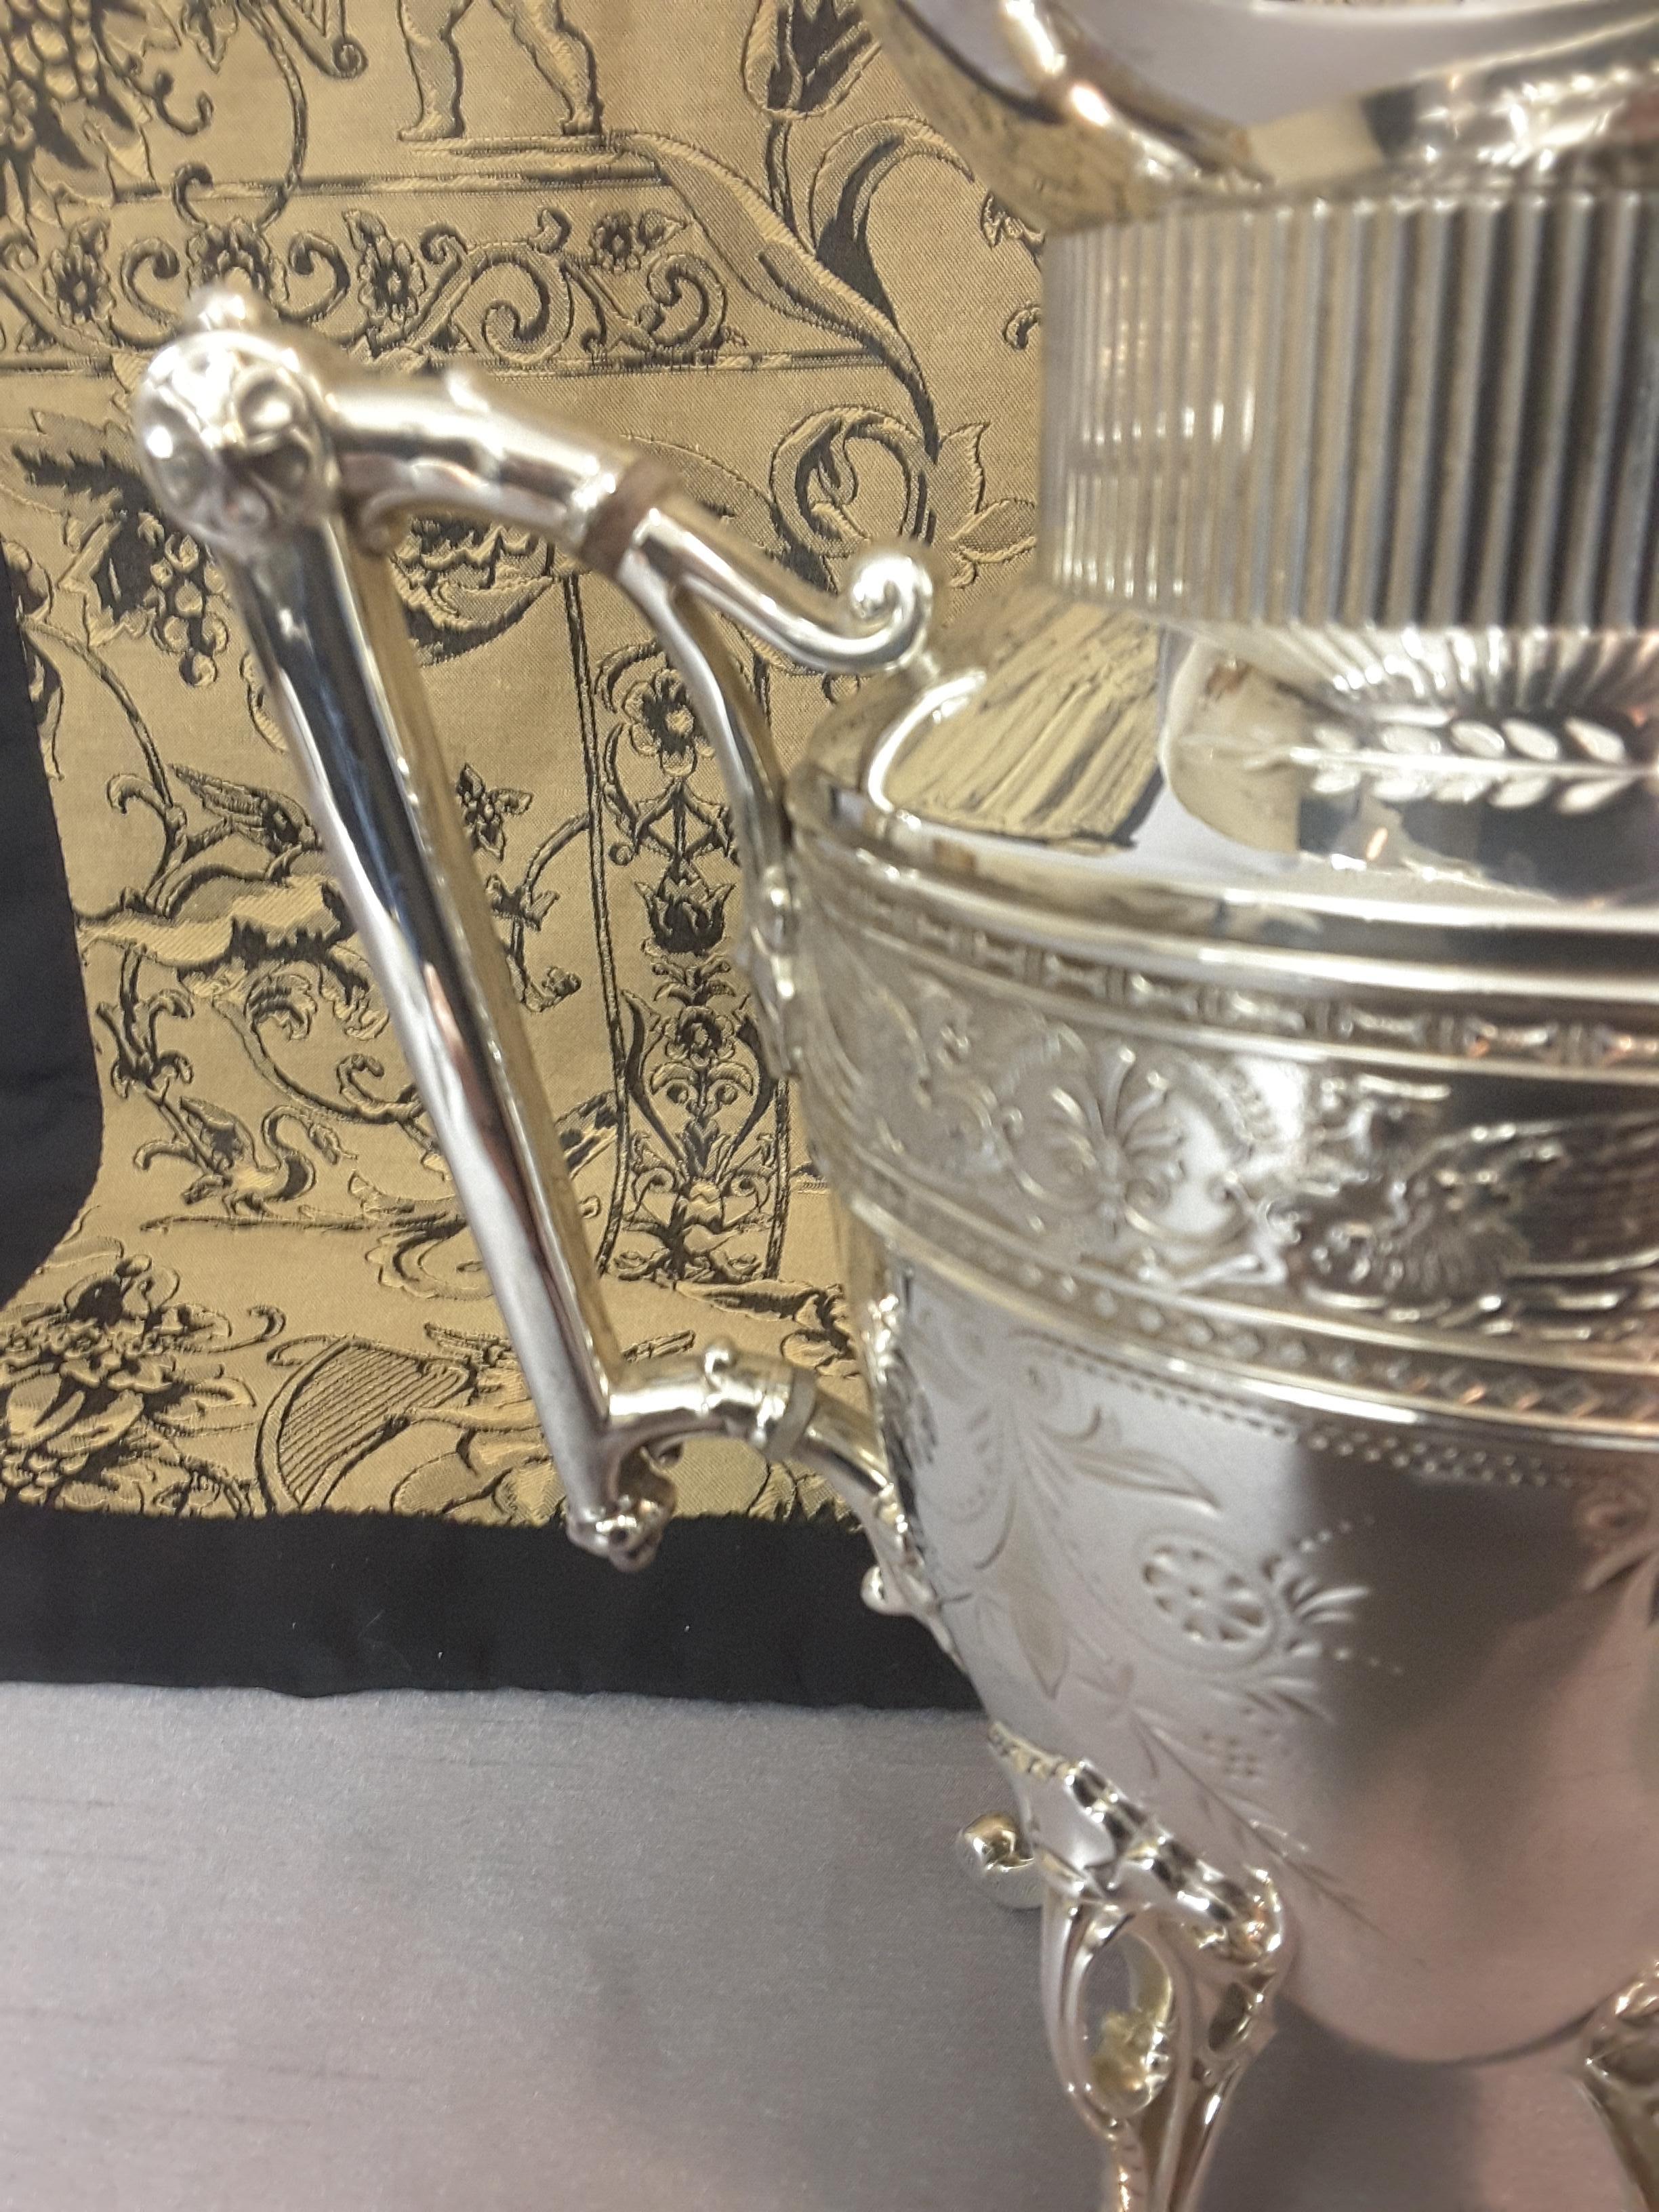 Exquisite Aesthetic Movement Silverplated Tea Service by Simpson, Hall & Miller For Sale 8